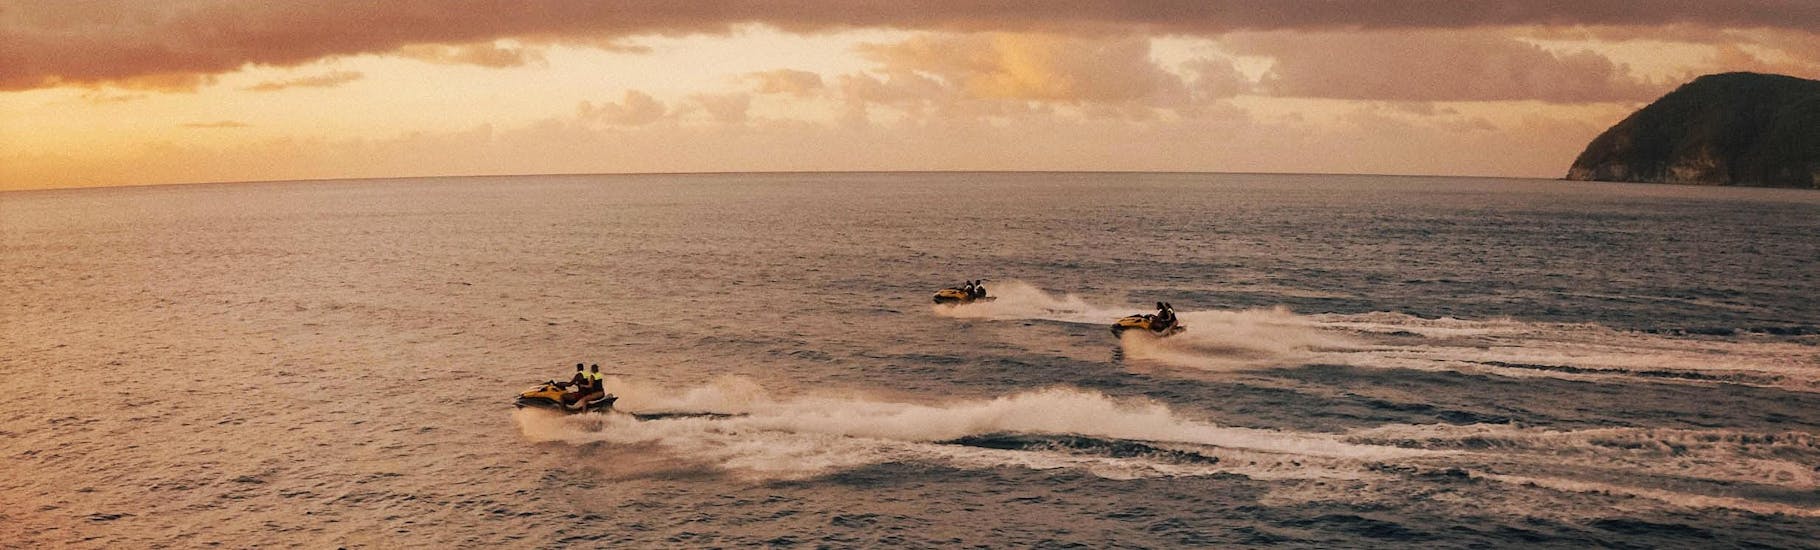 A group of several people on 3 Jet skis have fun during the jet ski safari in the Cousteau reserve with Iron Jet Bouillante.